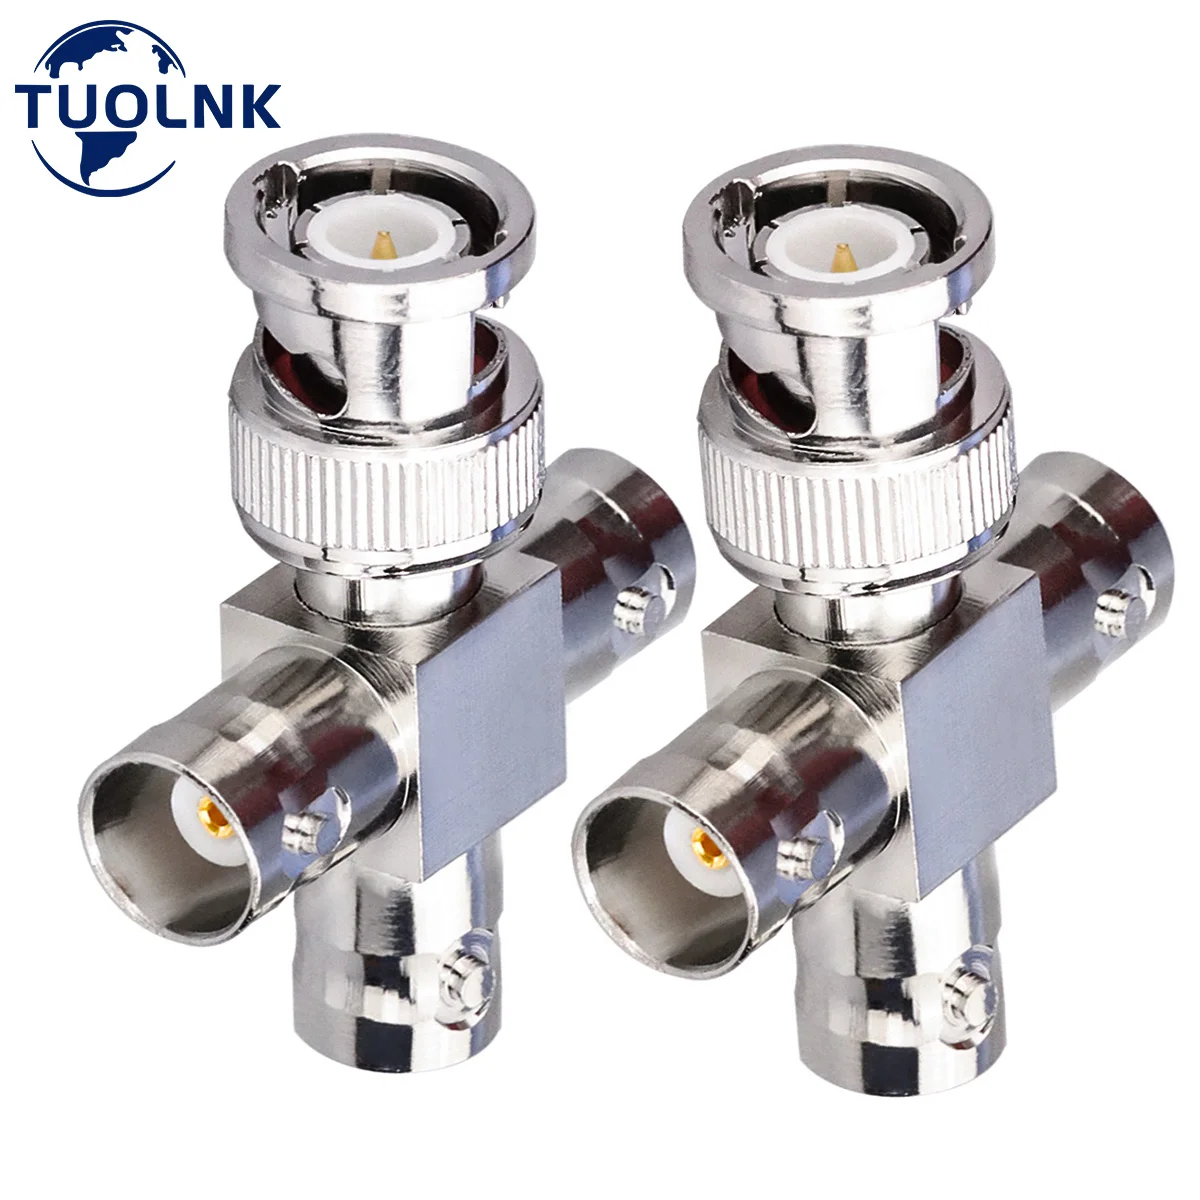 

2pcs/Lot BNC Male to 3 Female Jack T Type RF Coaxial Connector 4 Way Splitter Coax Adapter BNC Tee Connectors T-Shaped